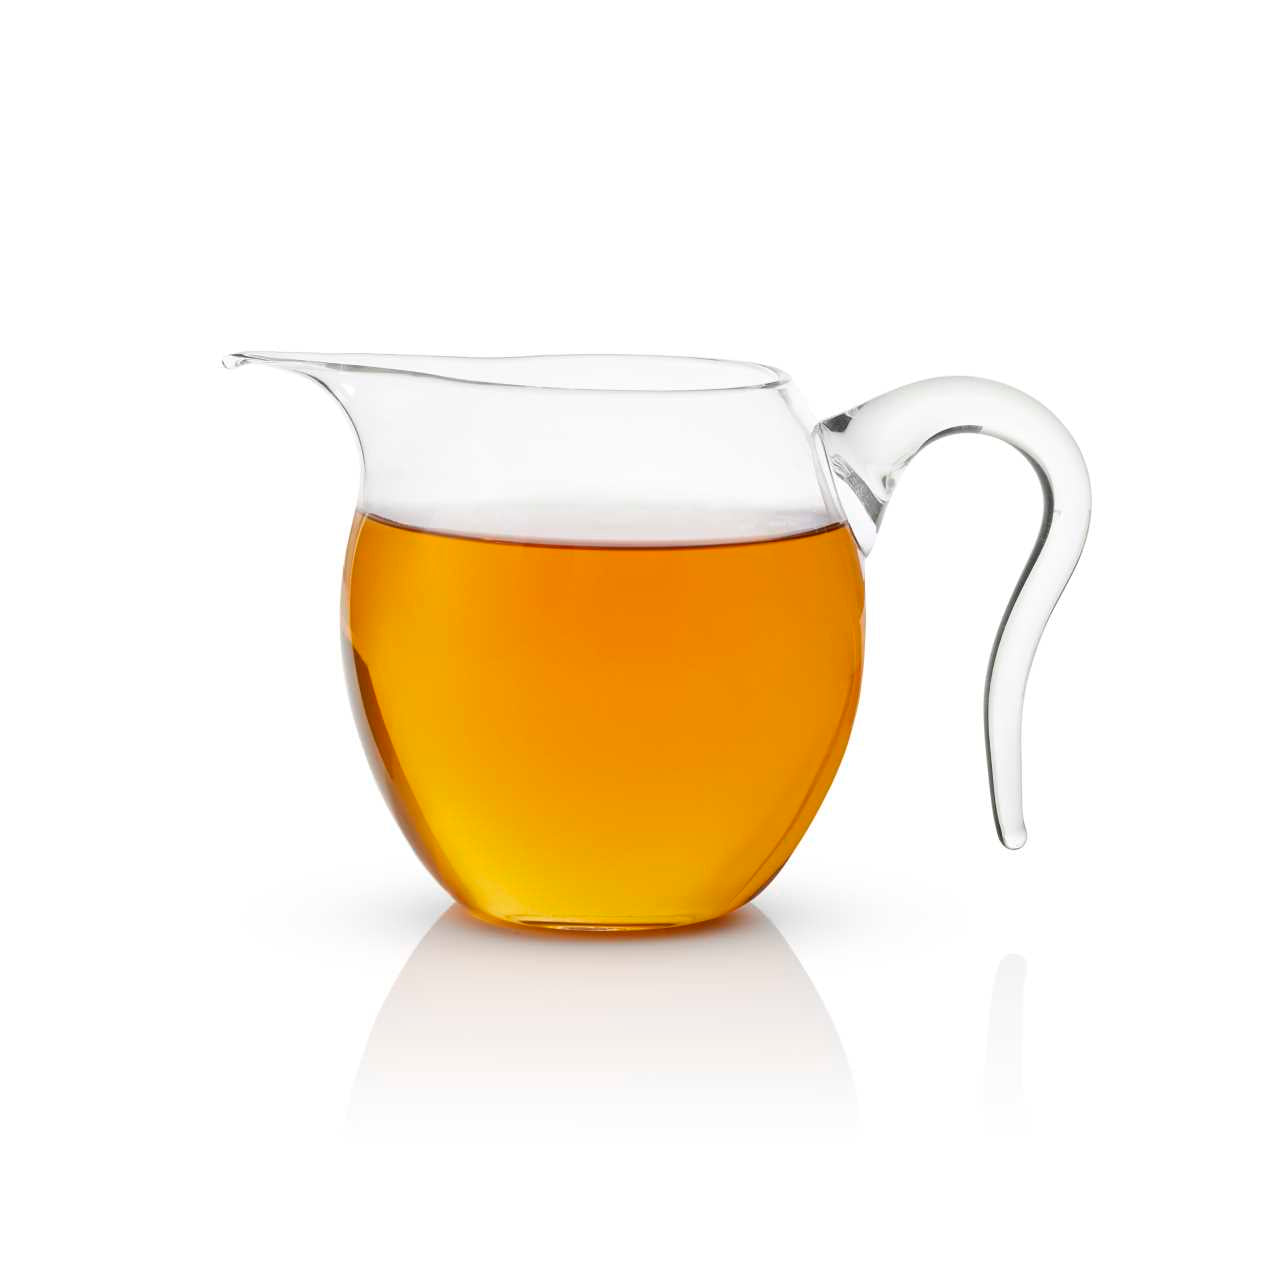 Glass Pitcher filled with tea